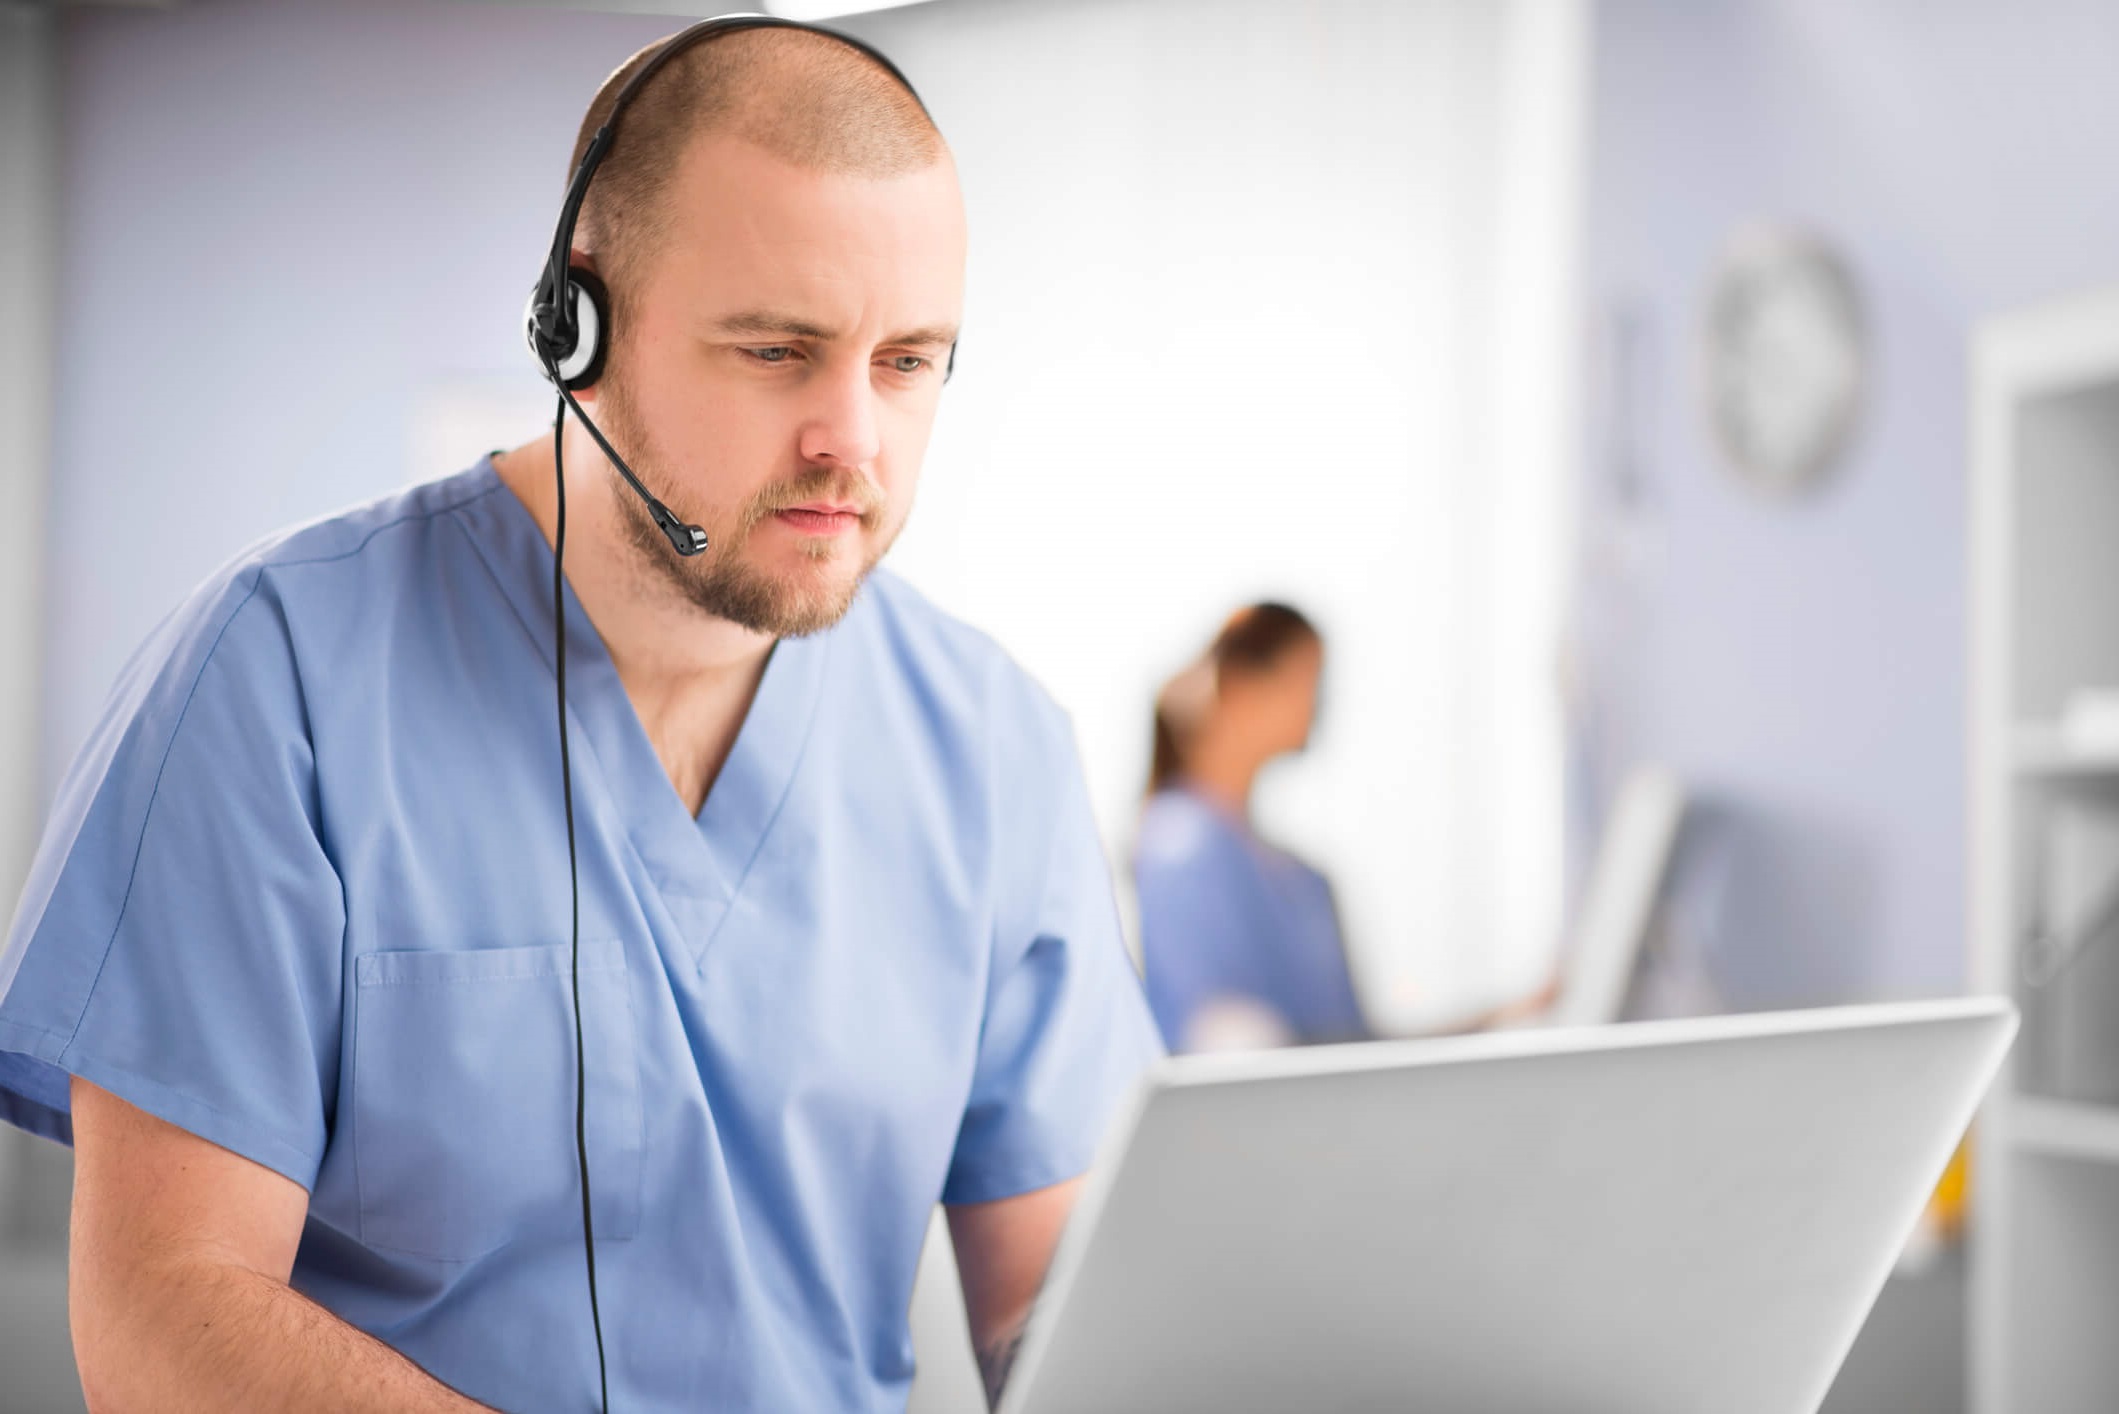 Male nurse on phone and computer, talking with patient.